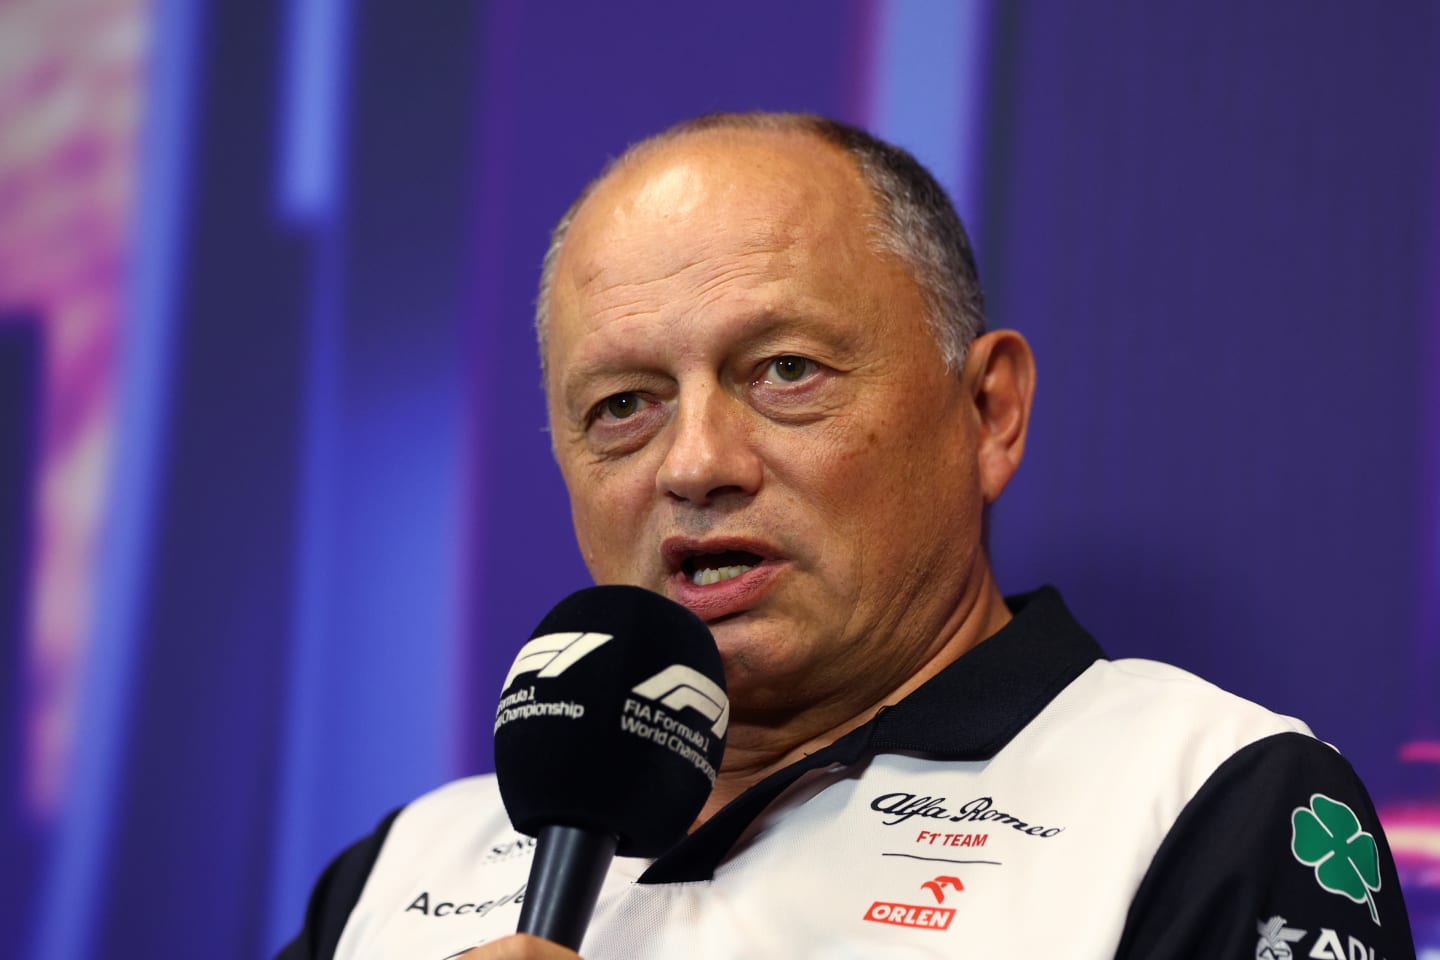 SINGAPORE, SINGAPORE - OCTOBER 01: Alfa Romeo Racing Team Principal Frederic Vasseur talks in the team principal's press conference before final practice ahead of the F1 Grand Prix of Singapore at Marina Bay Street Circuit on October 01, 2022 in Singapore, Singapore. (Photo by Clive Rose/Getty Images,)